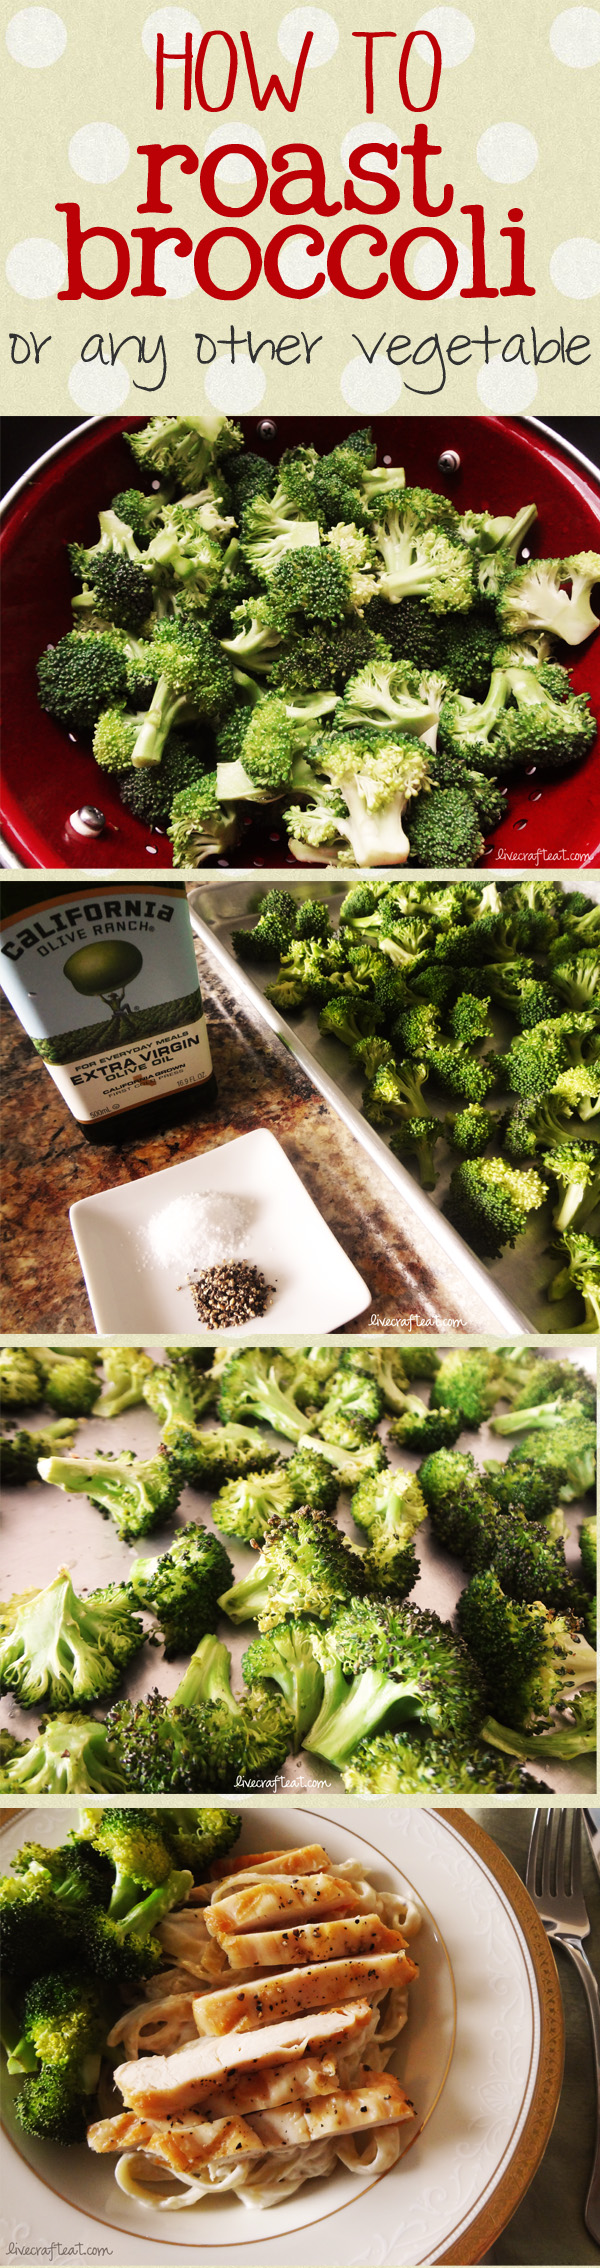 how to roast broccoli - by far my favorite way to eat it.